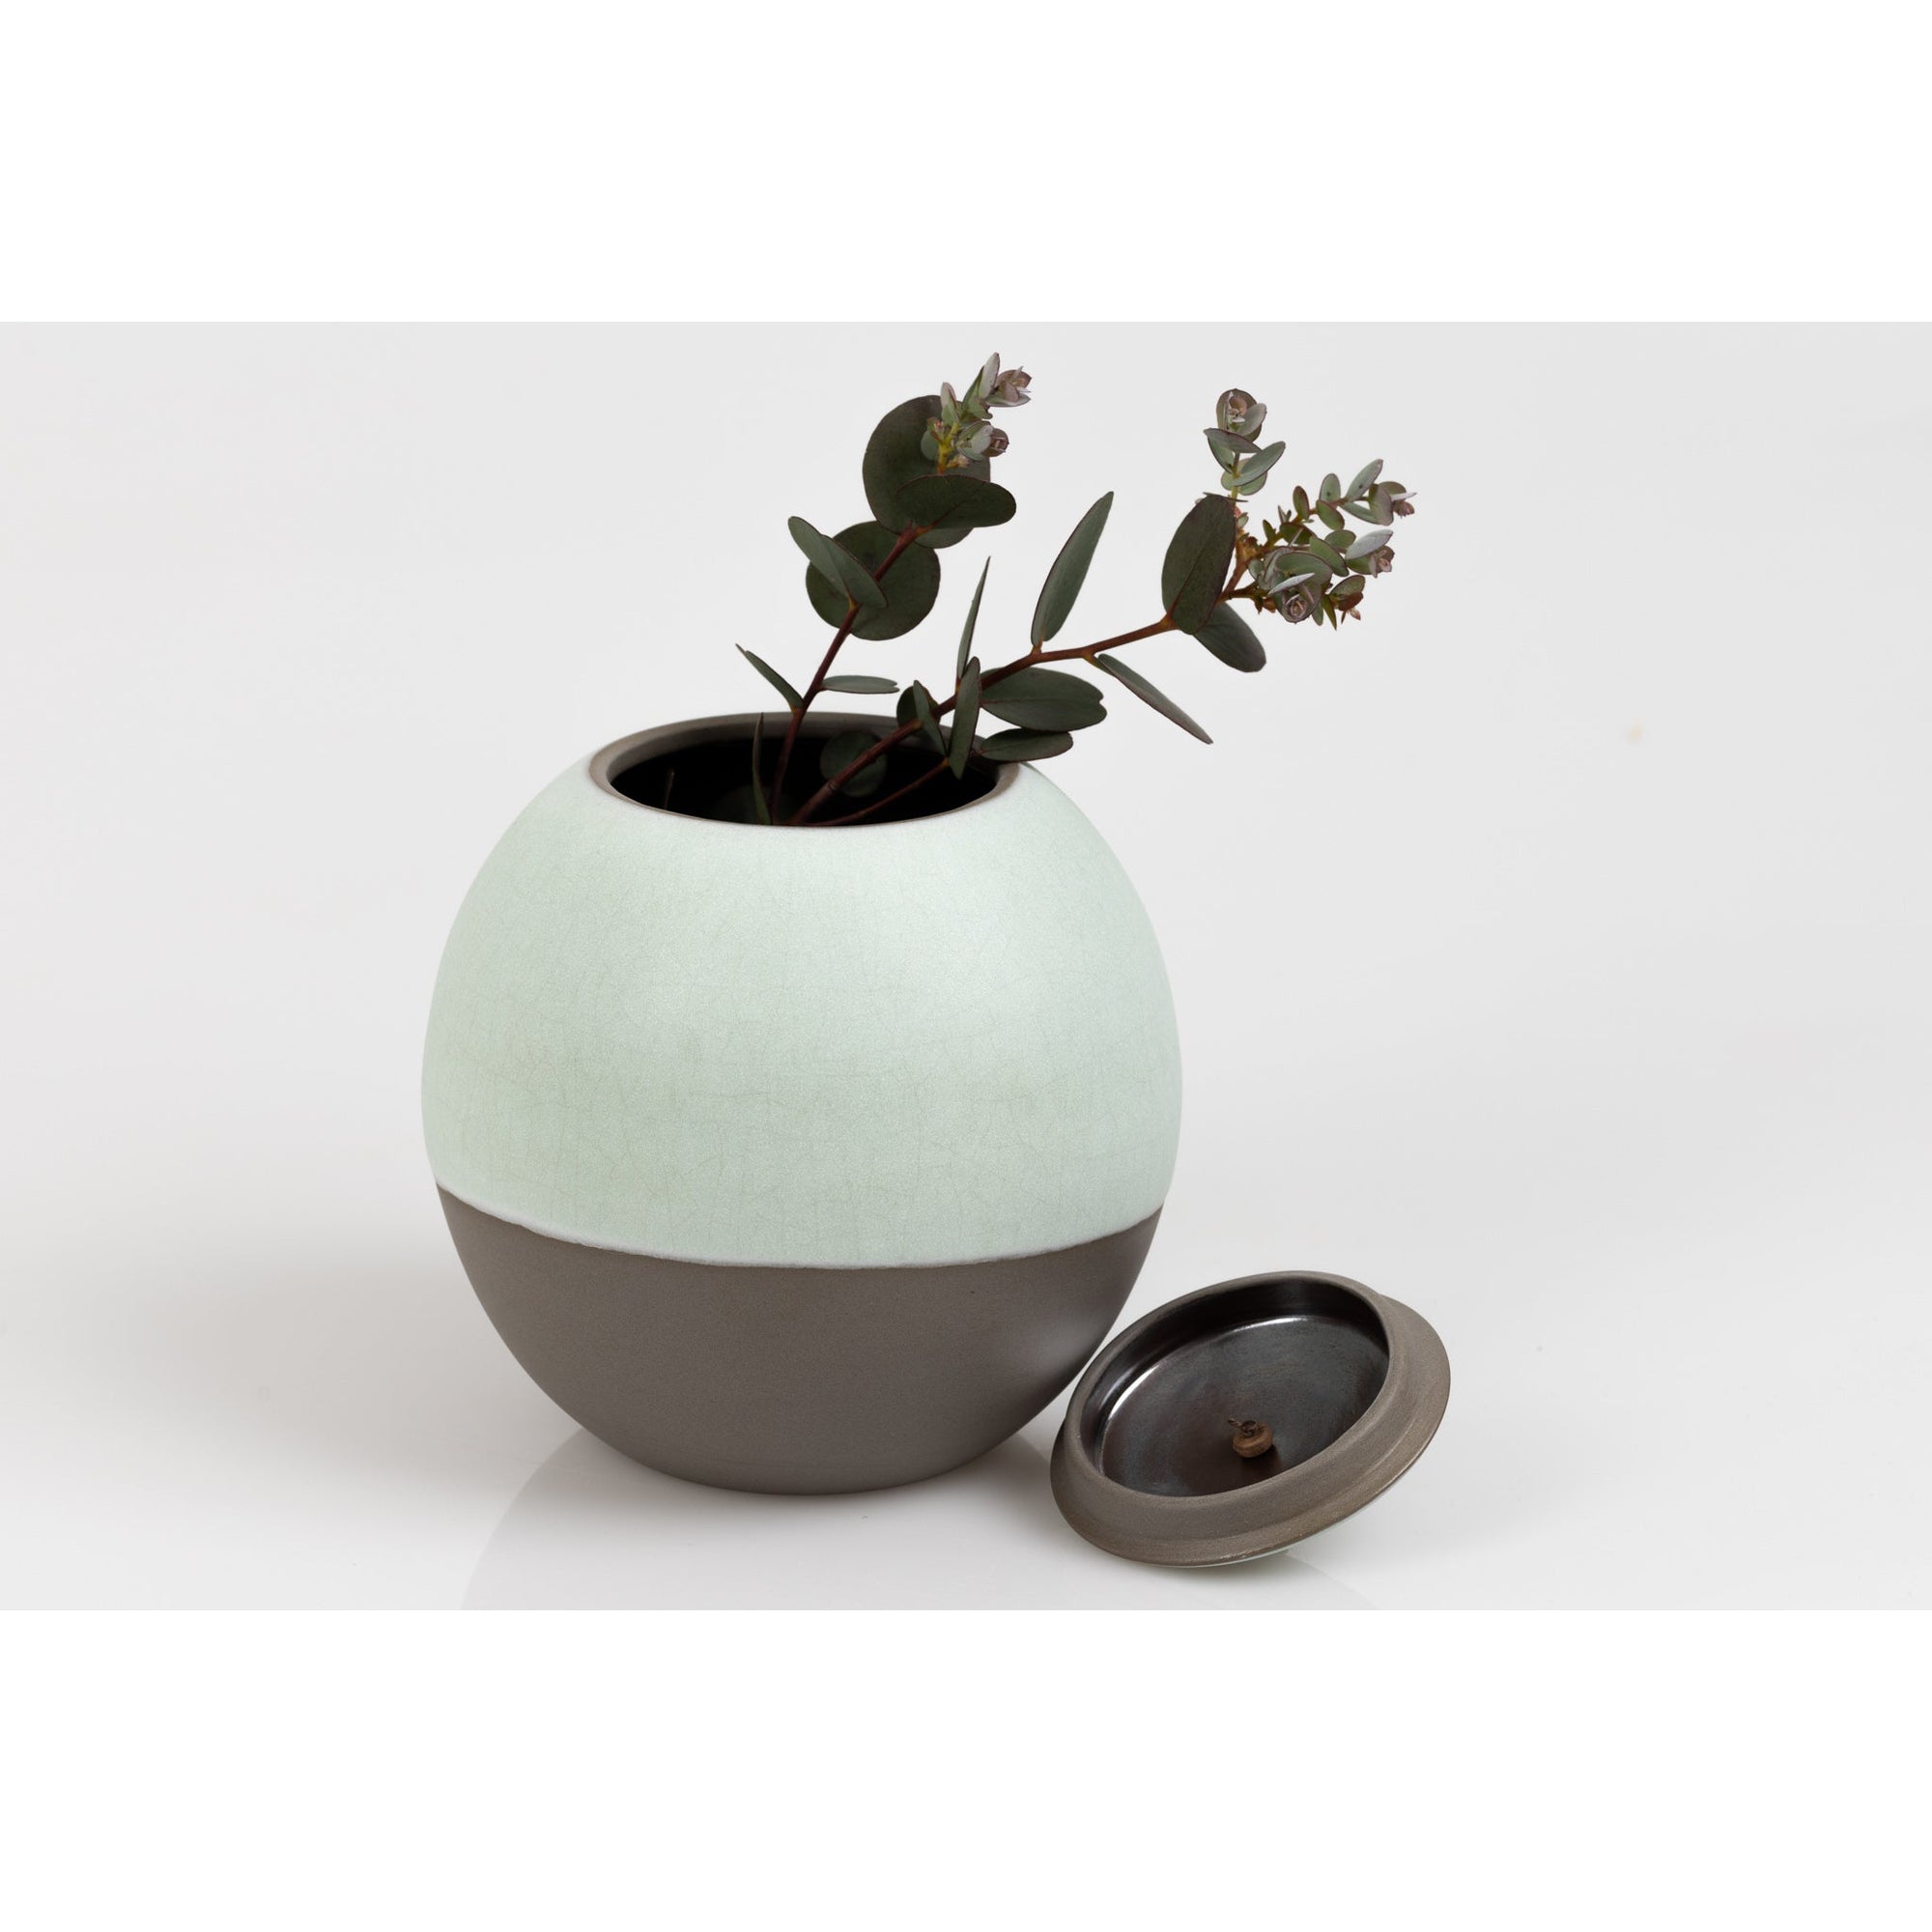 KSF1 Lunar, Stoneware Sphere Pot by Kate Schuricht, available at Padstow Gallery, Cornwall